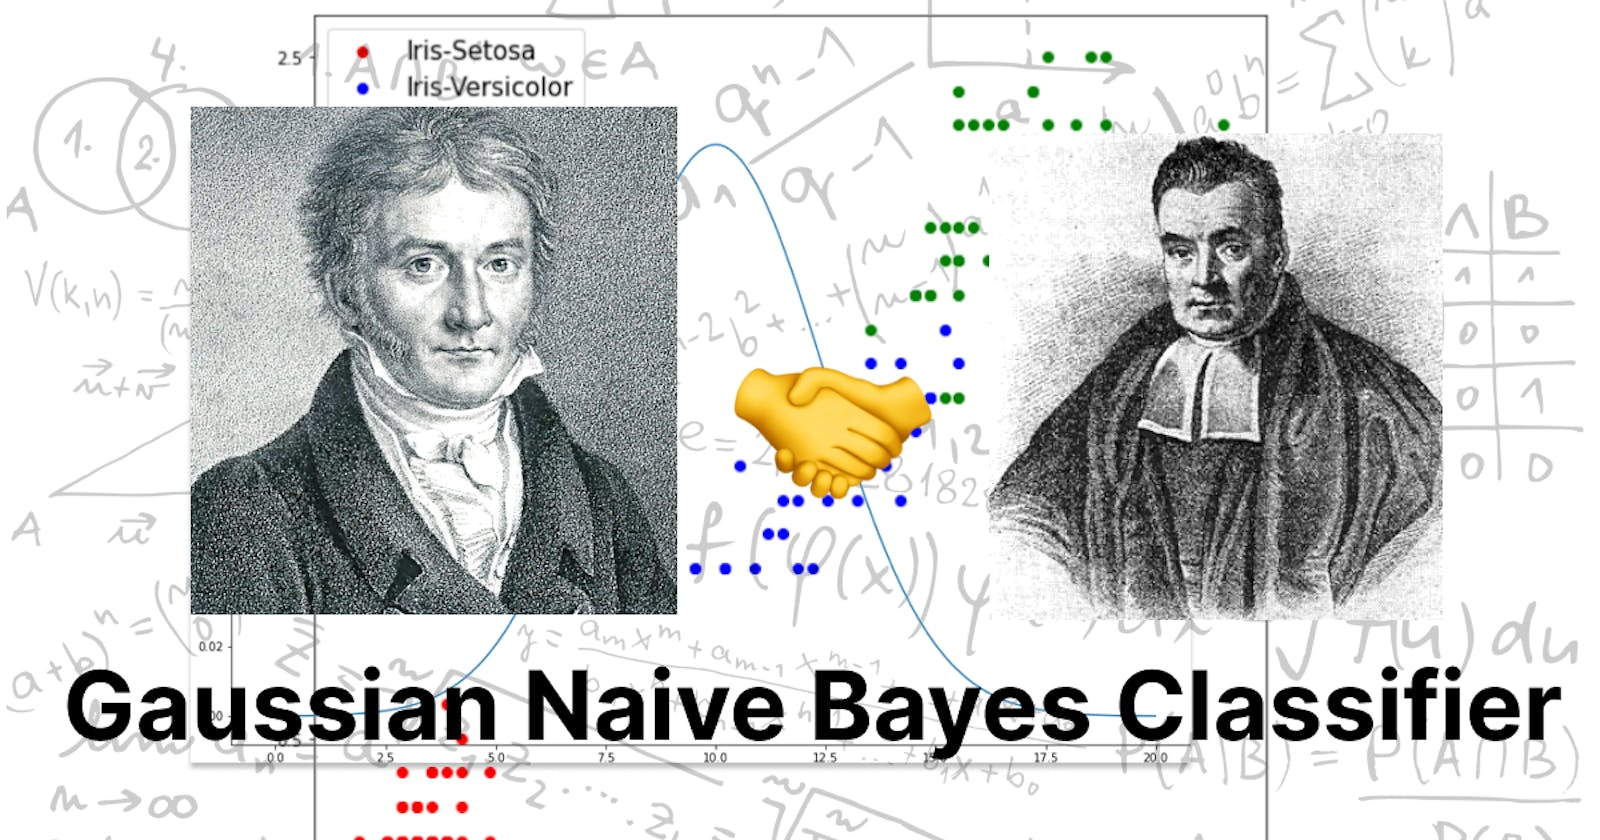 Multiclass Classification using Gaussian Naive Bayes from scratch